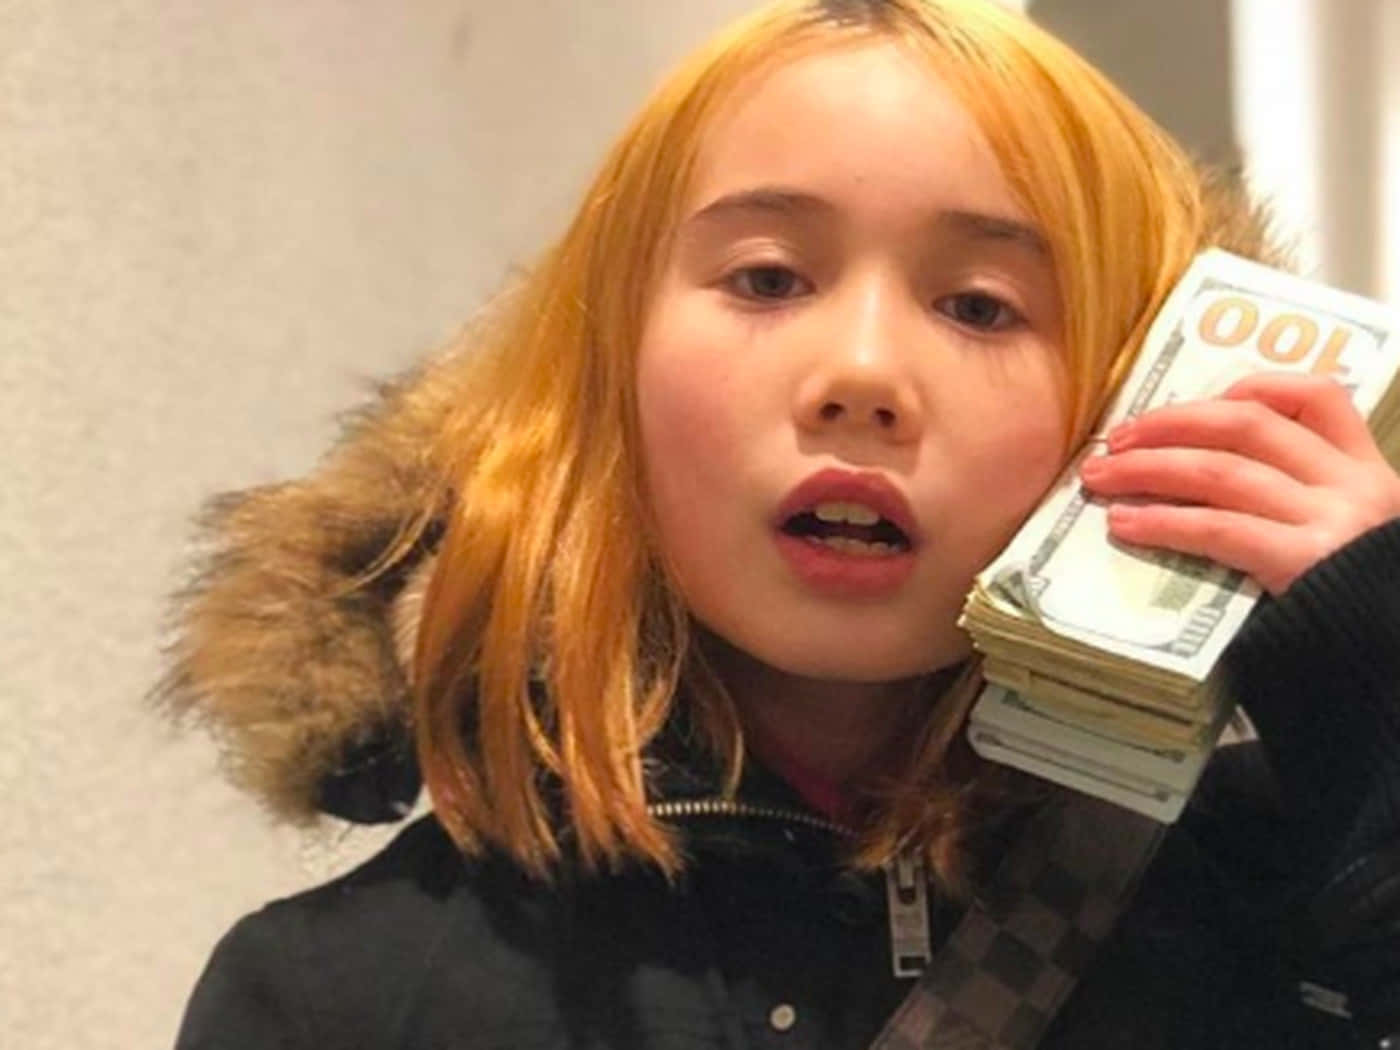 A Girl With Orange Hair Holding Up Money